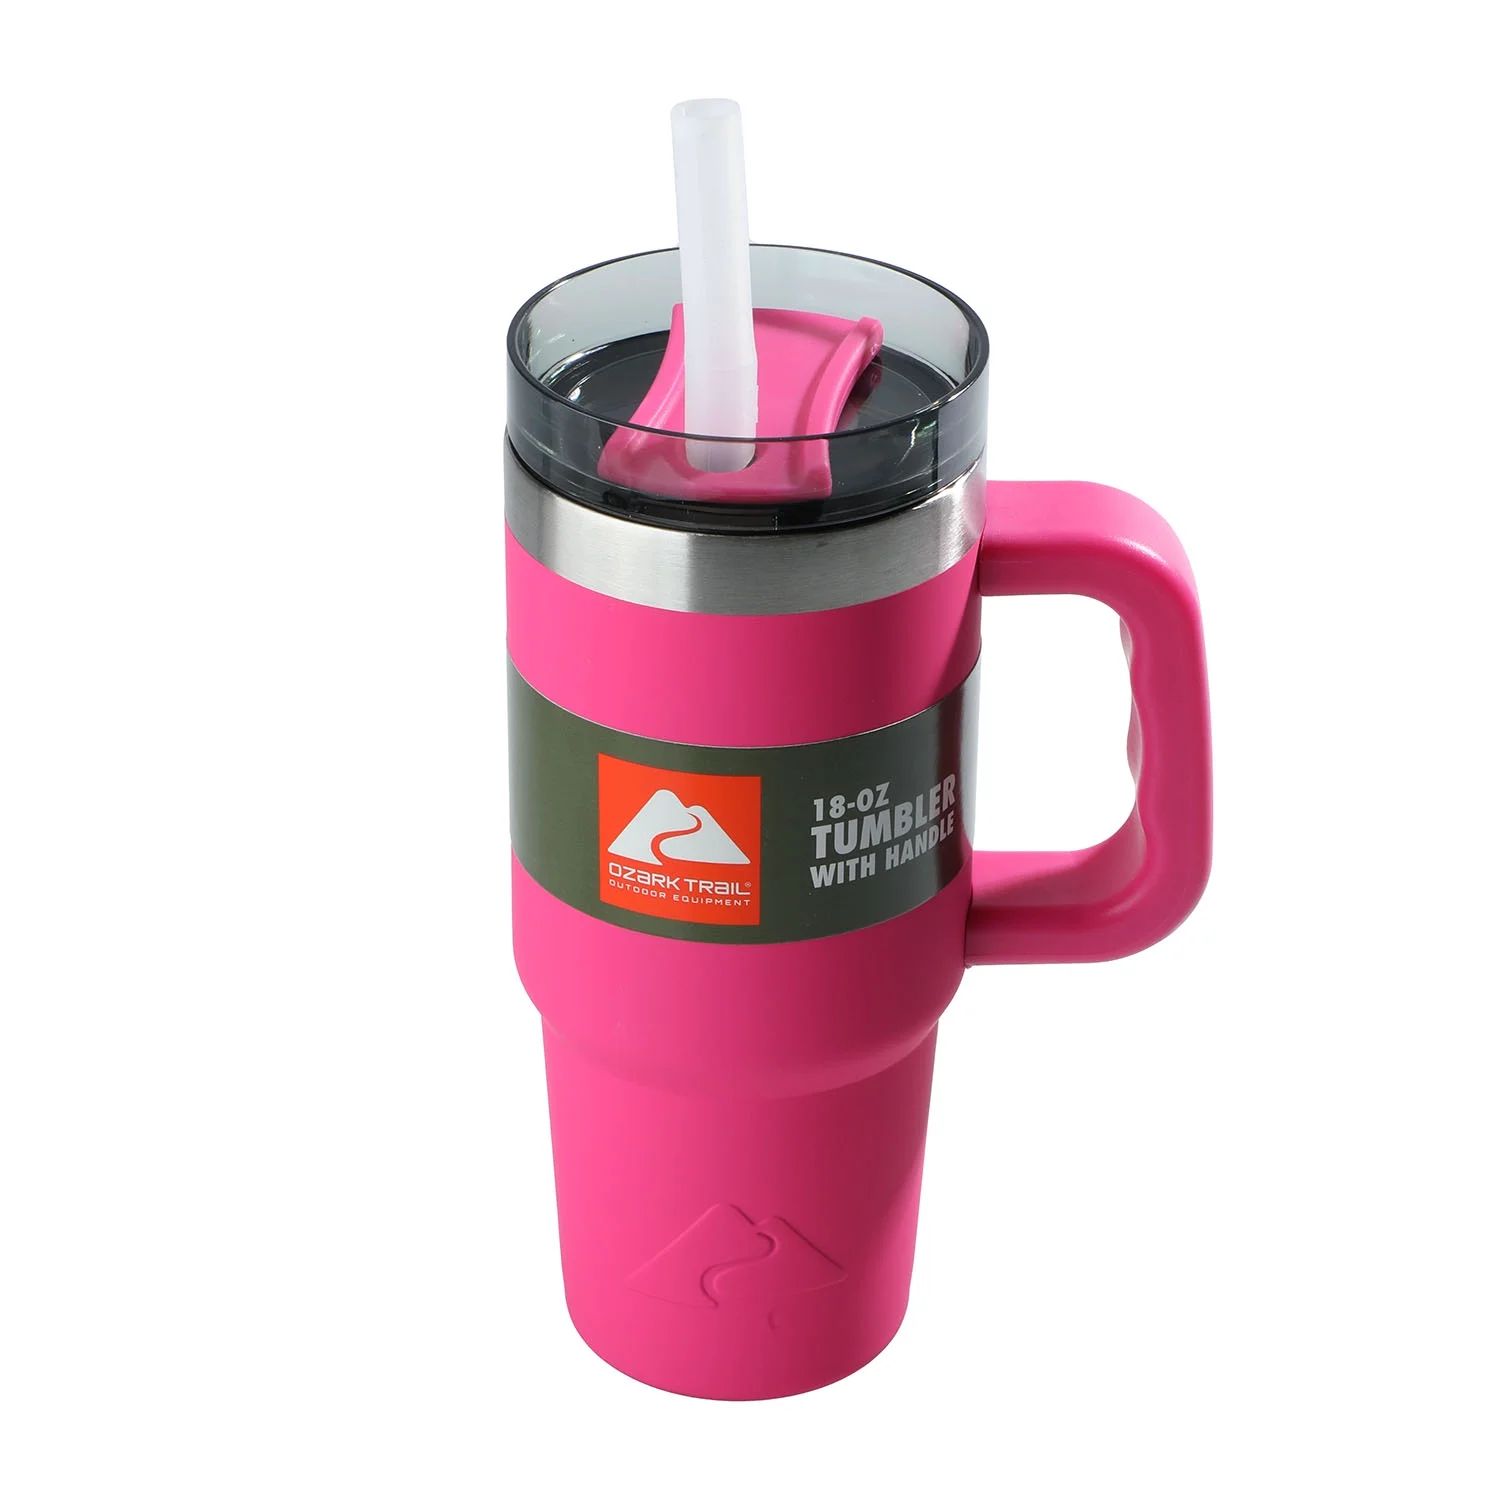 Ozark Trail 18 oz Insulated Stainless Steel Tumbler with Handle - Hot Pink | Walmart (US)